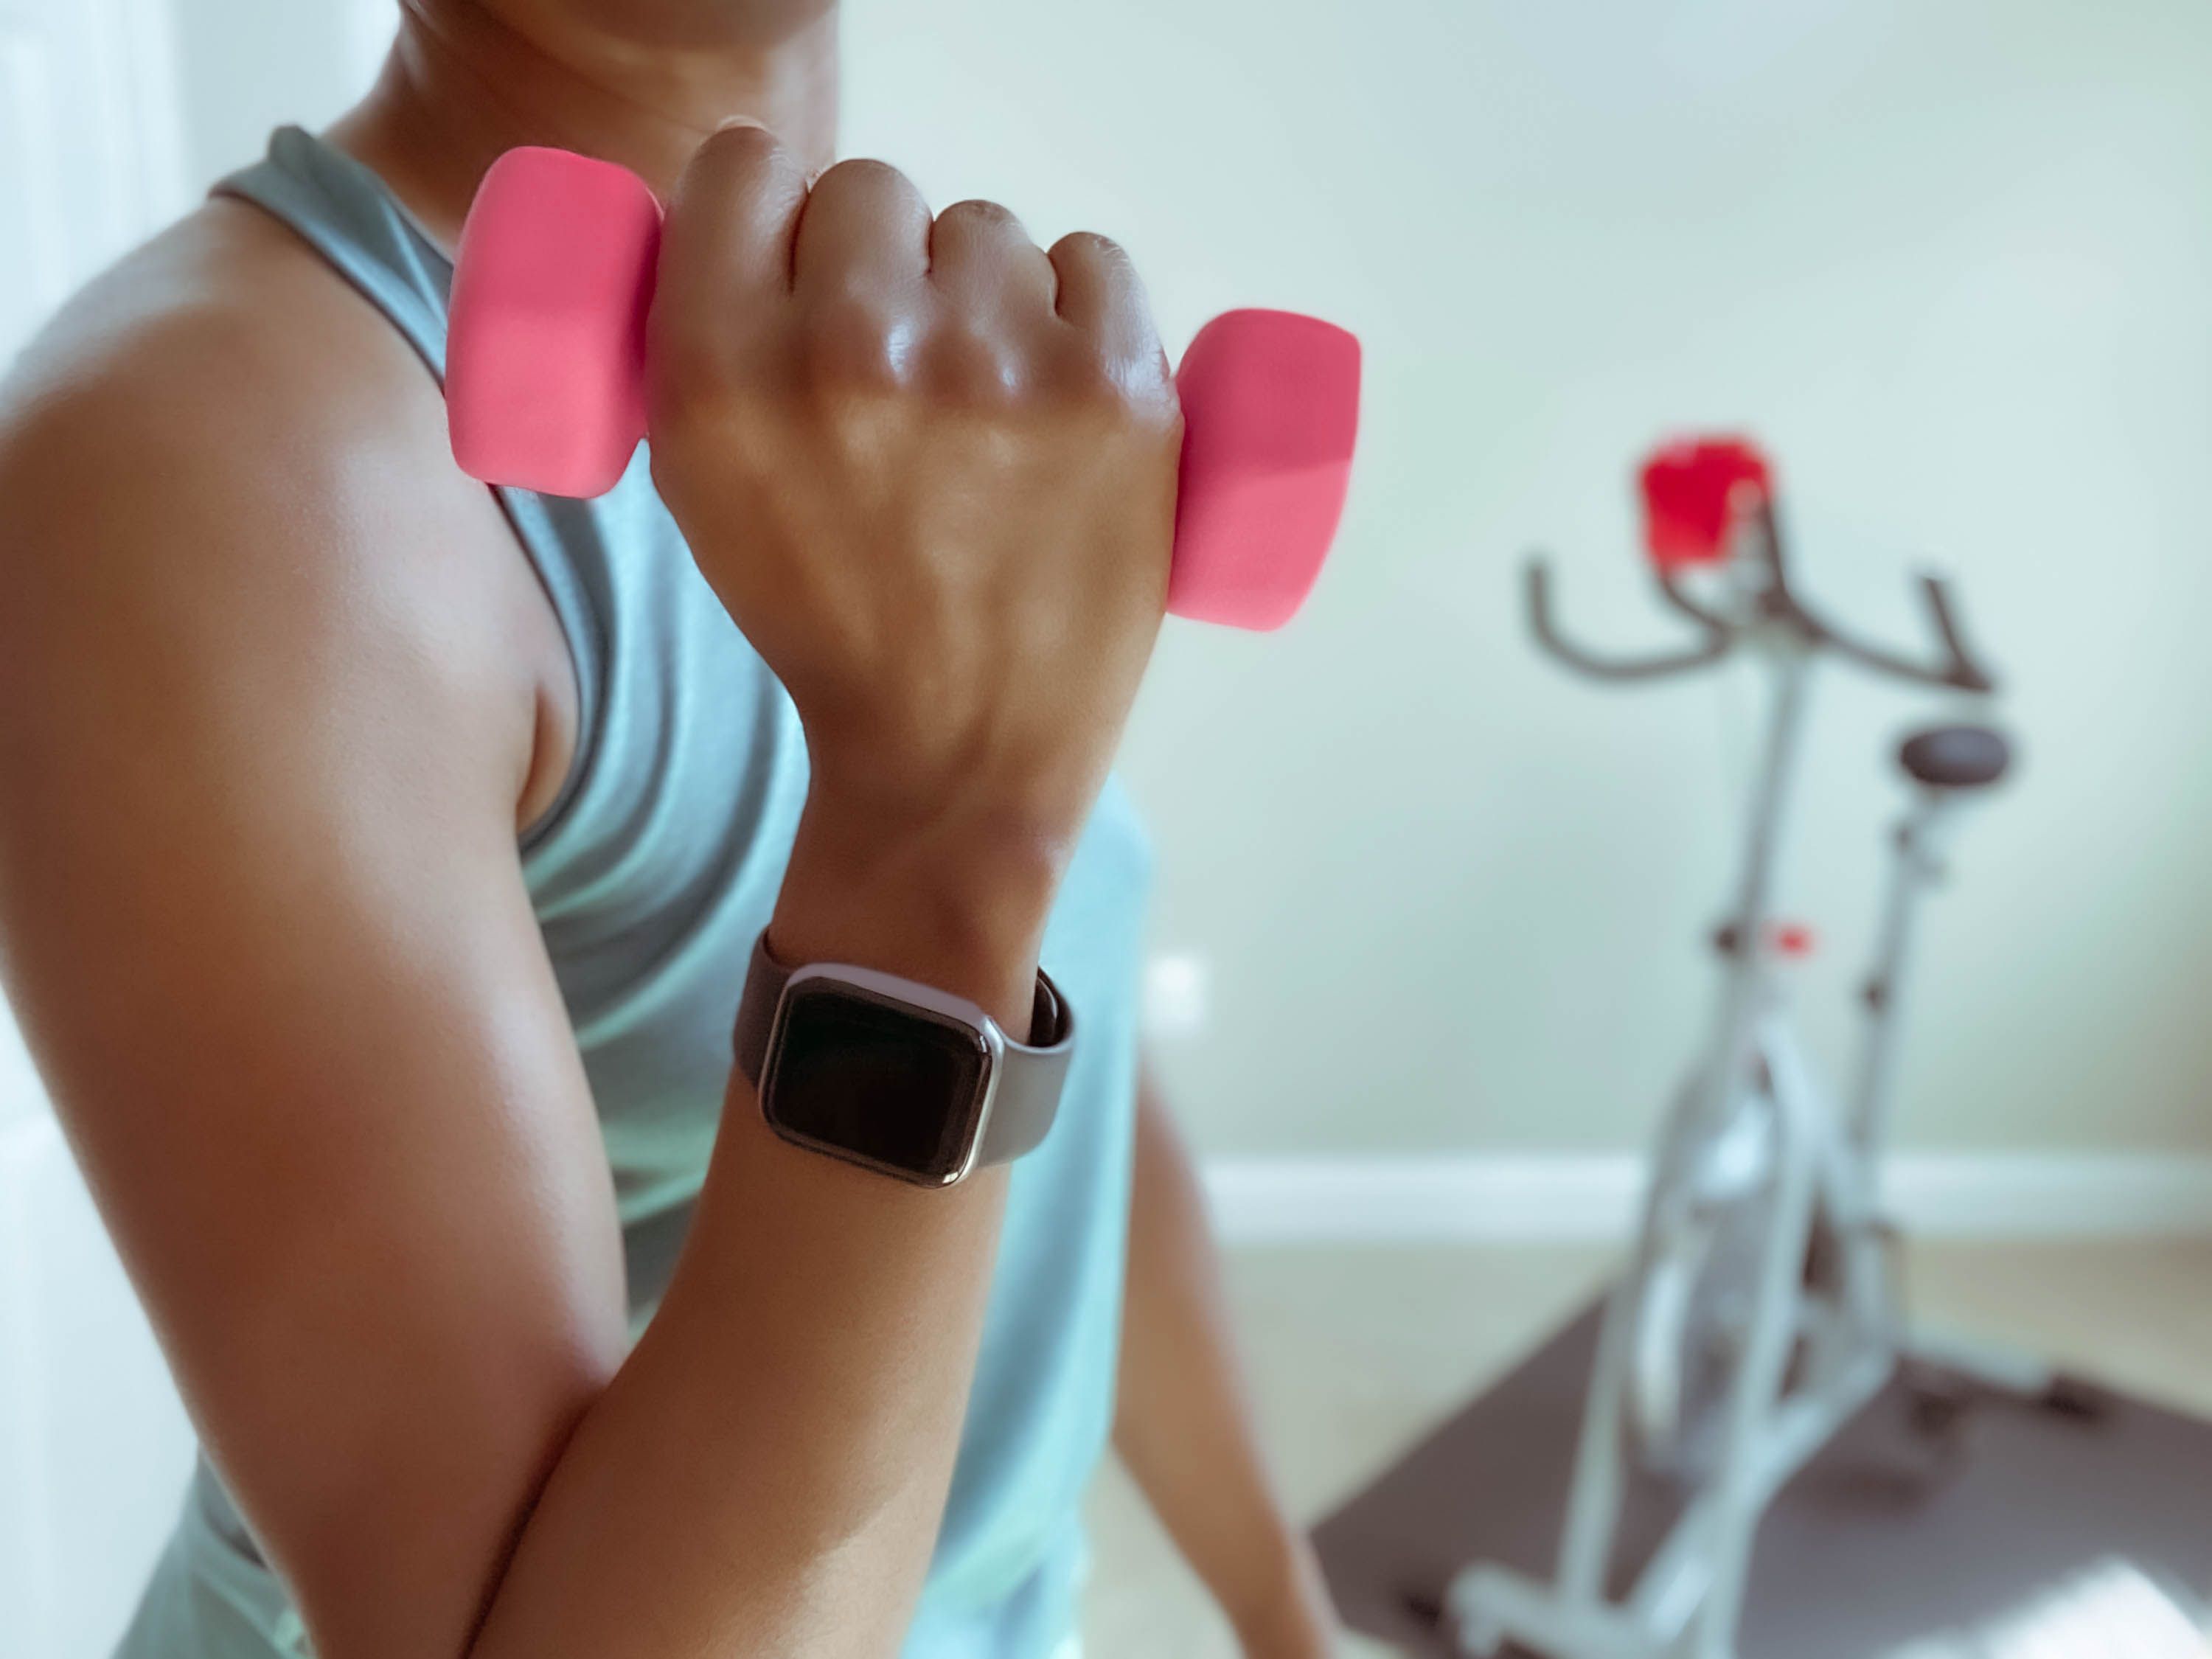 Best Stylish Smartwatches & Fitness Trackers For Women 2021 – StyleCaster